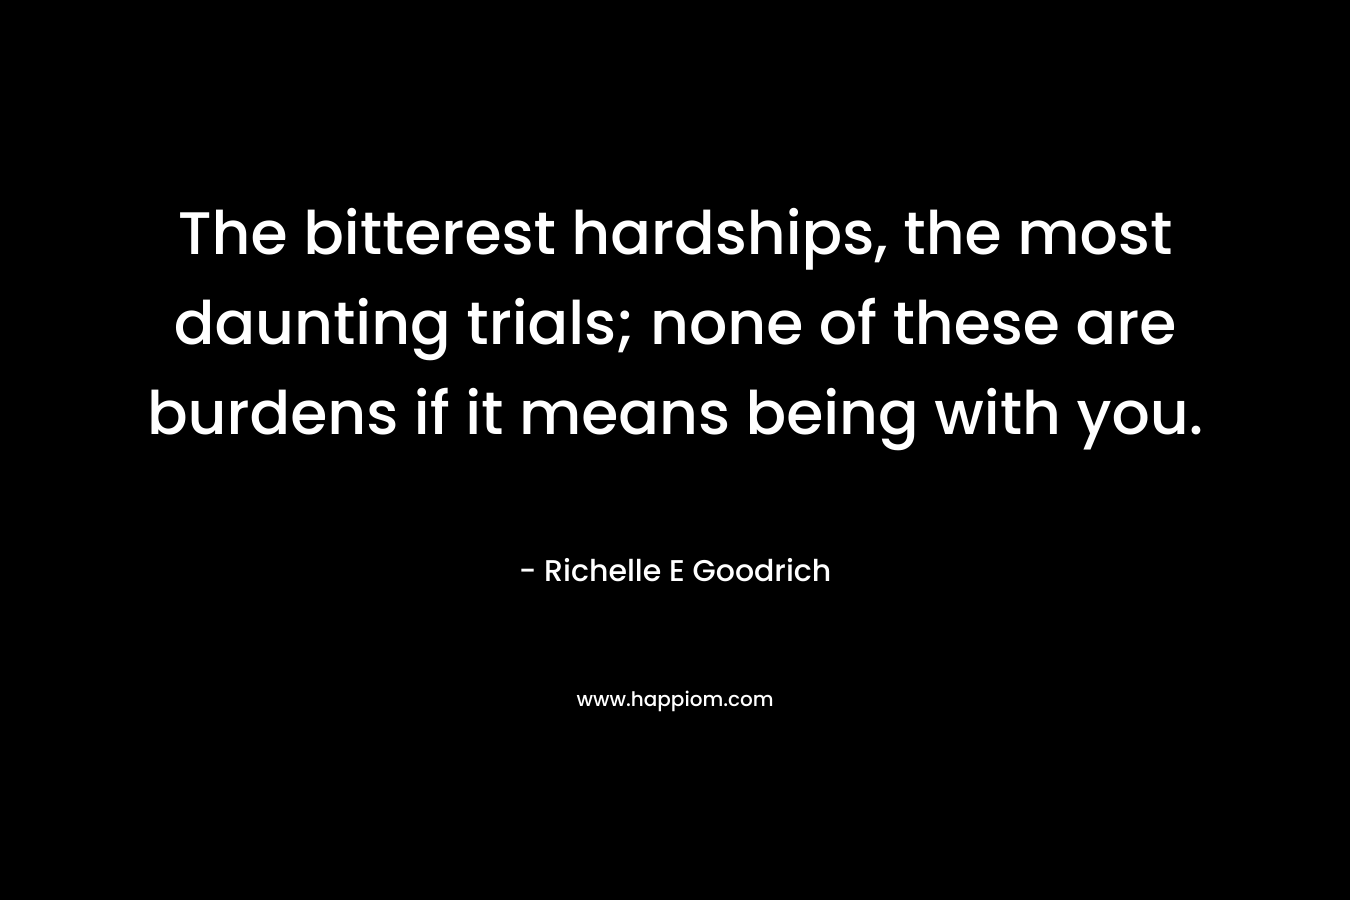 The bitterest hardships, the most daunting trials; none of these are burdens if it means being with you. – Richelle E Goodrich